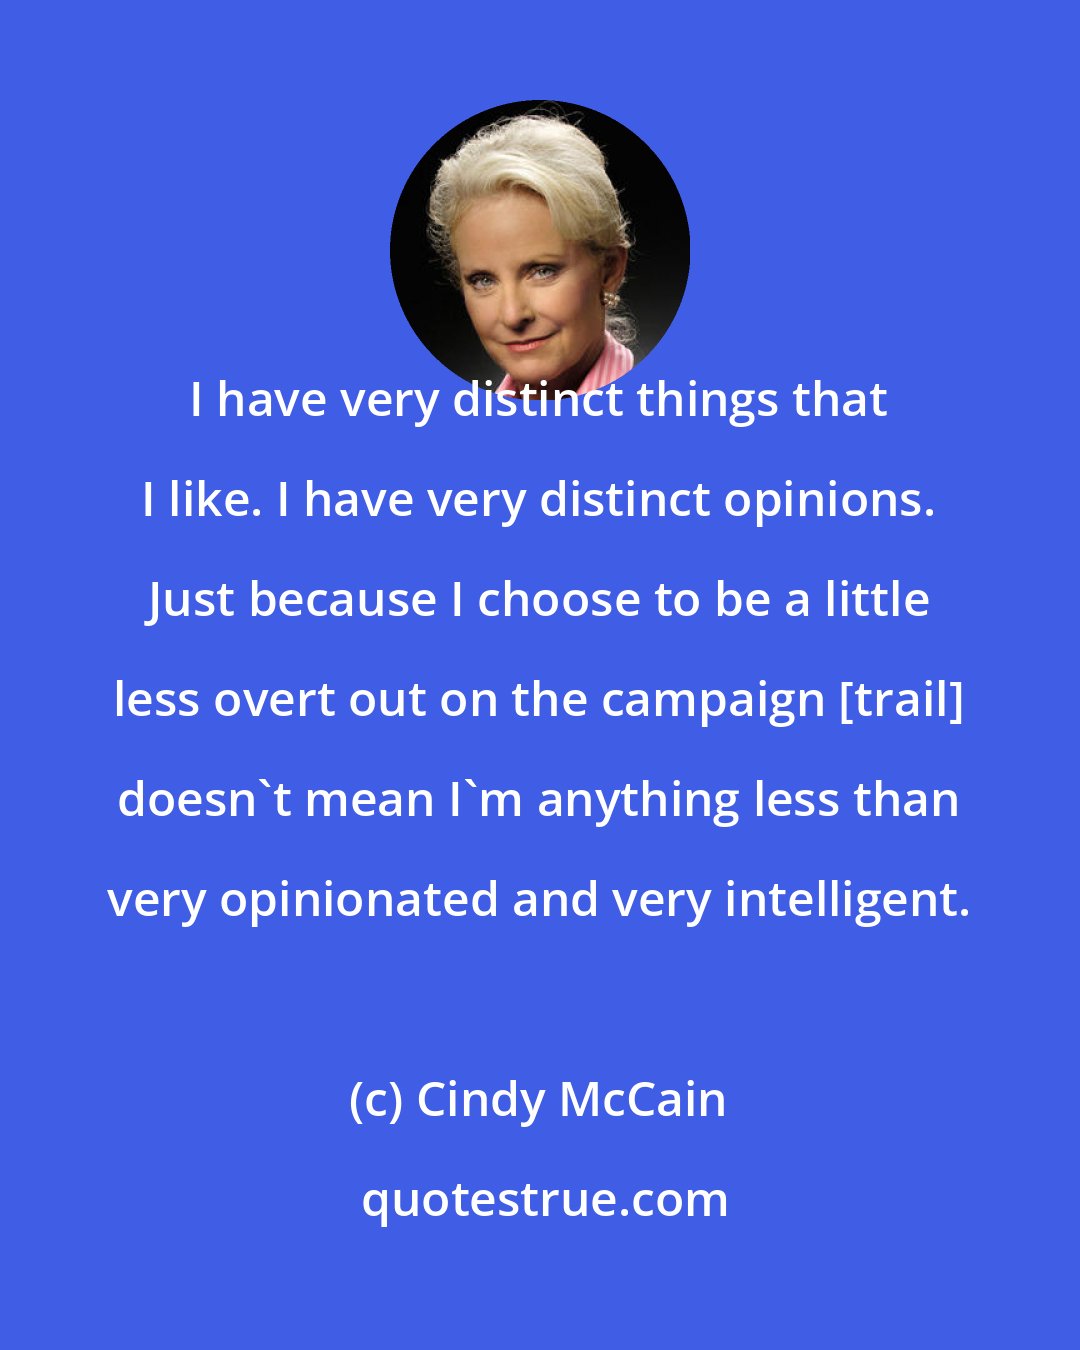 Cindy McCain: I have very distinct things that I like. I have very distinct opinions. Just because I choose to be a little less overt out on the campaign [trail] doesn't mean I'm anything less than very opinionated and very intelligent.